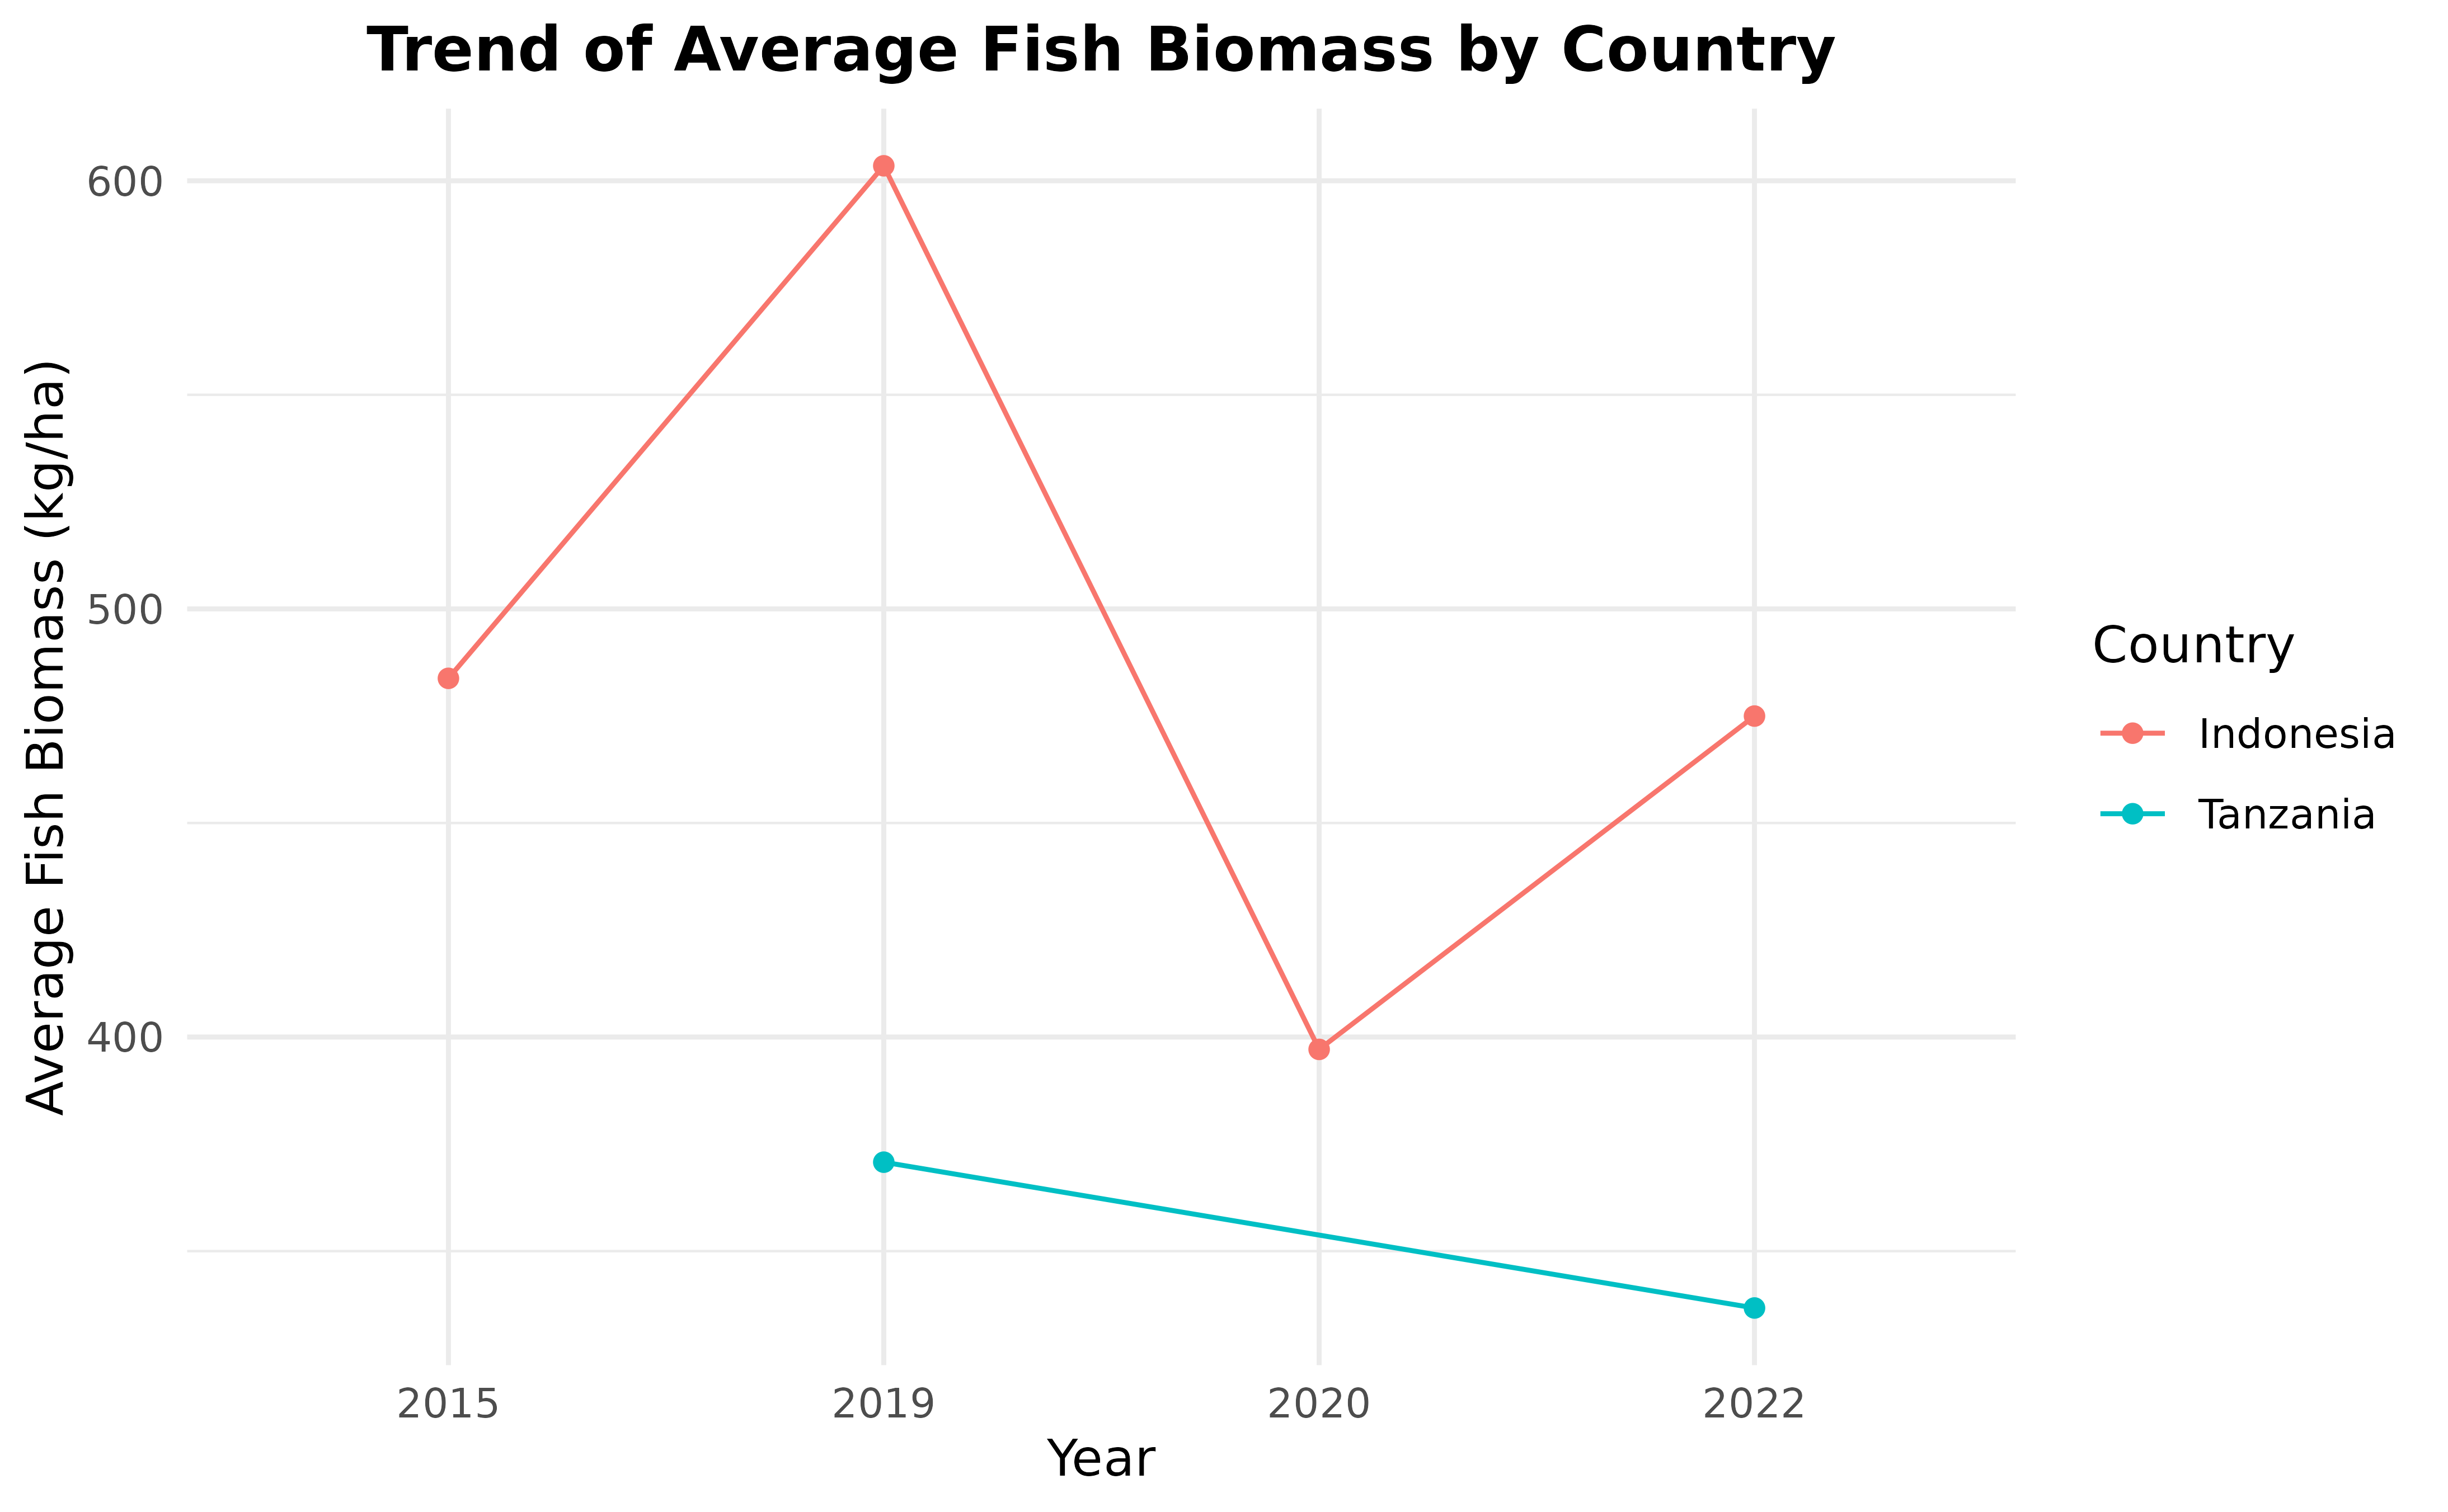 A line chart with year on the x axis and average fish biomass on the y axis. The lines are colored in red and tosca to differentiate per country. The plot now has a title: Trend of  Average Fish Biomass by Country. The x axis is titled: Year and the y axis is titled: Average Fish Biomass (kg/ha).